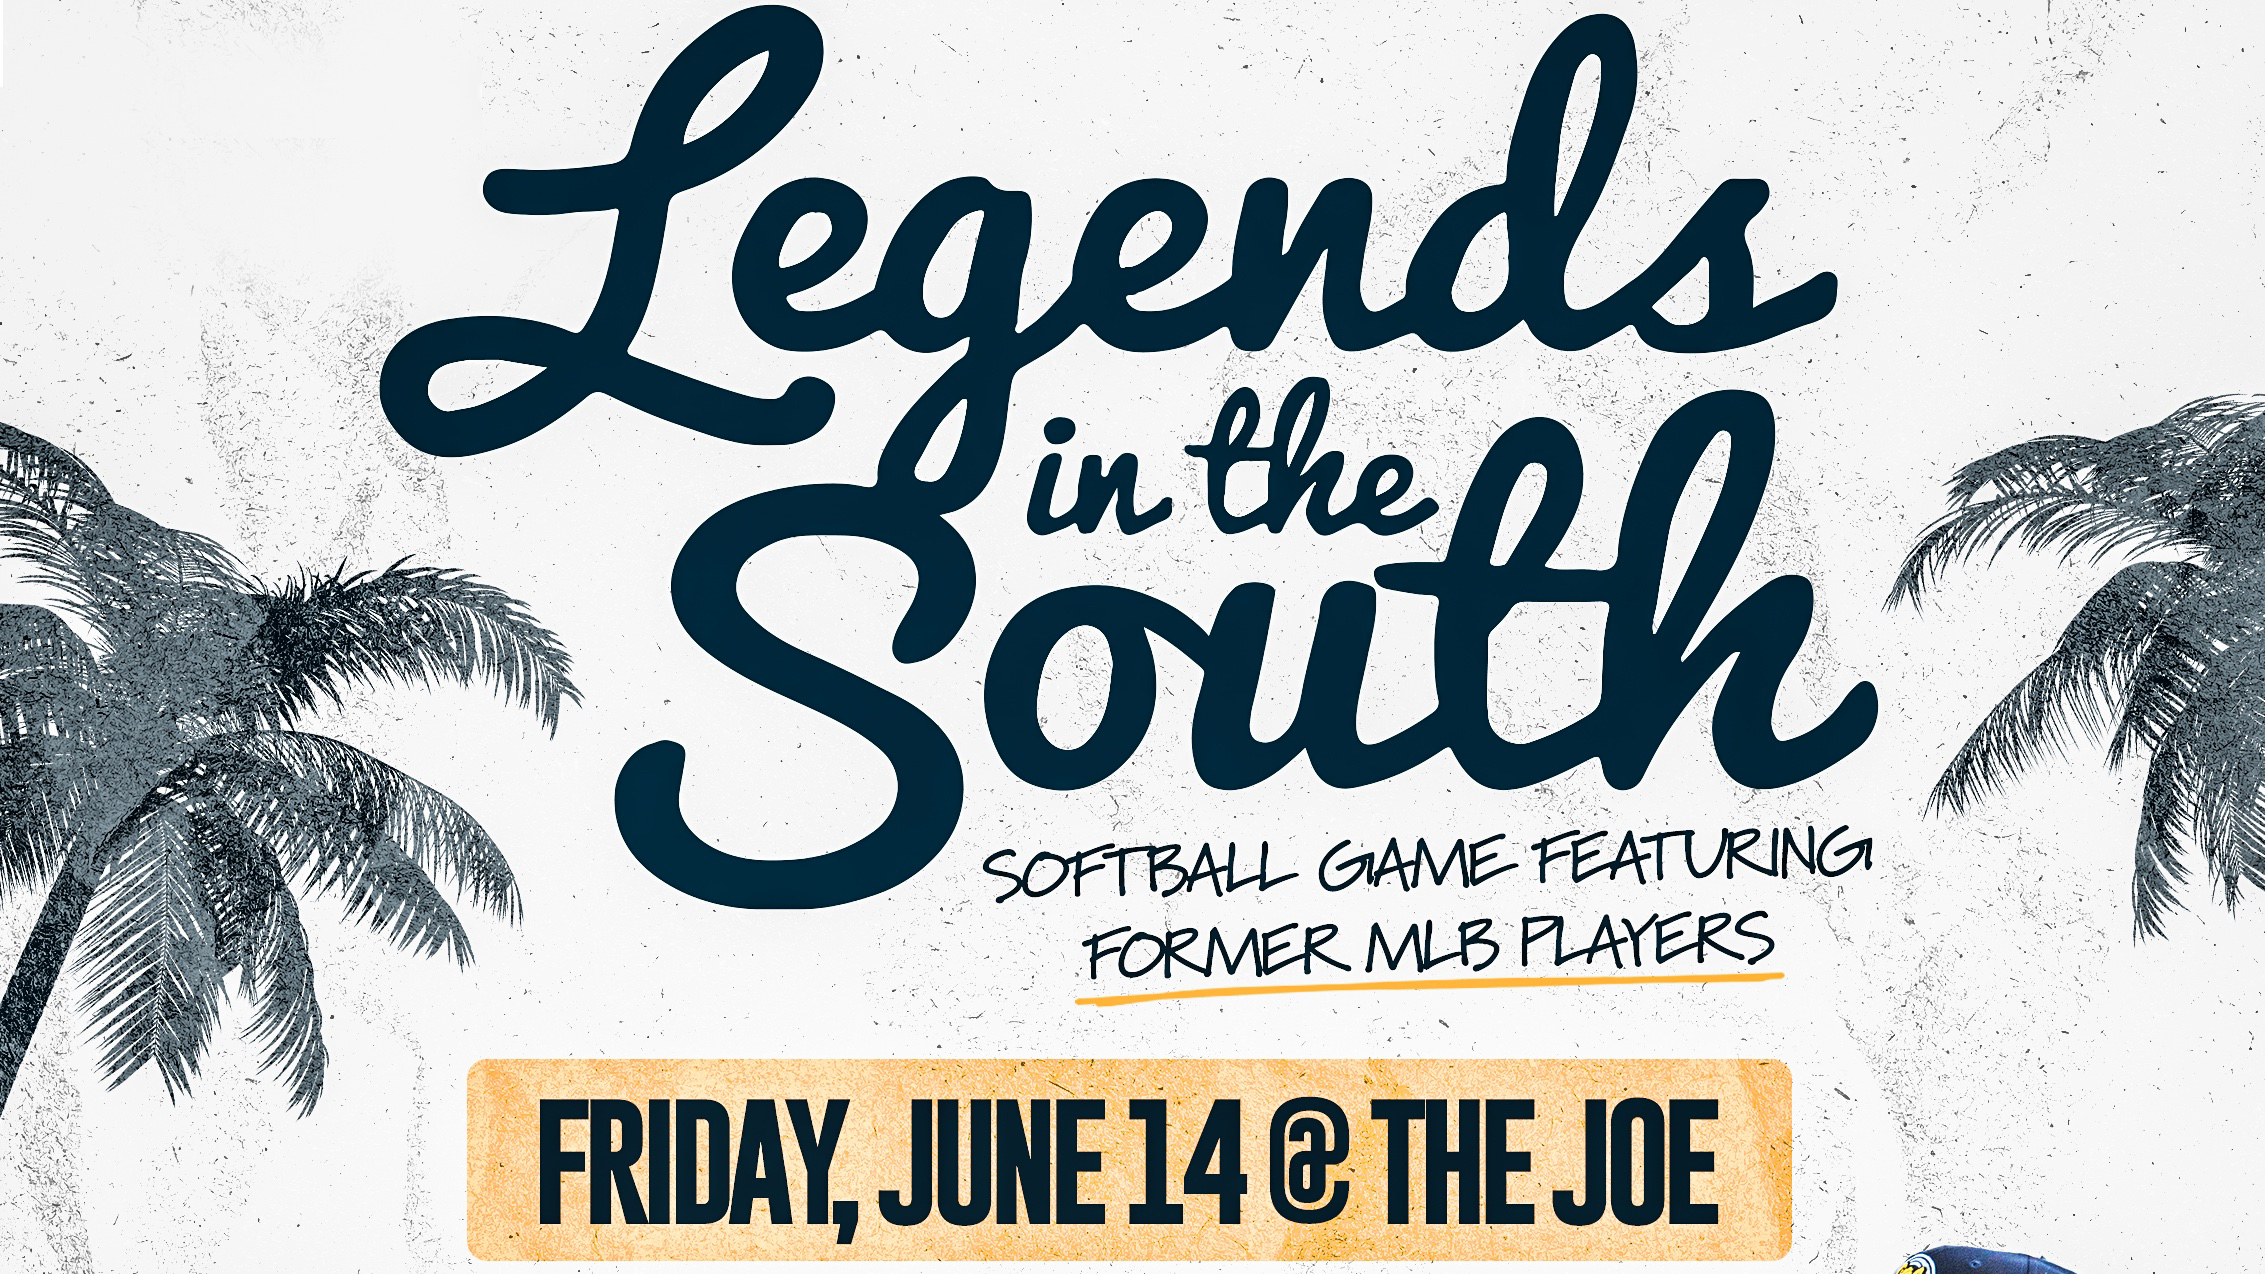 Photo - Legends in the South softwall event at the Joseph R. Riley Park in Charleston, SC